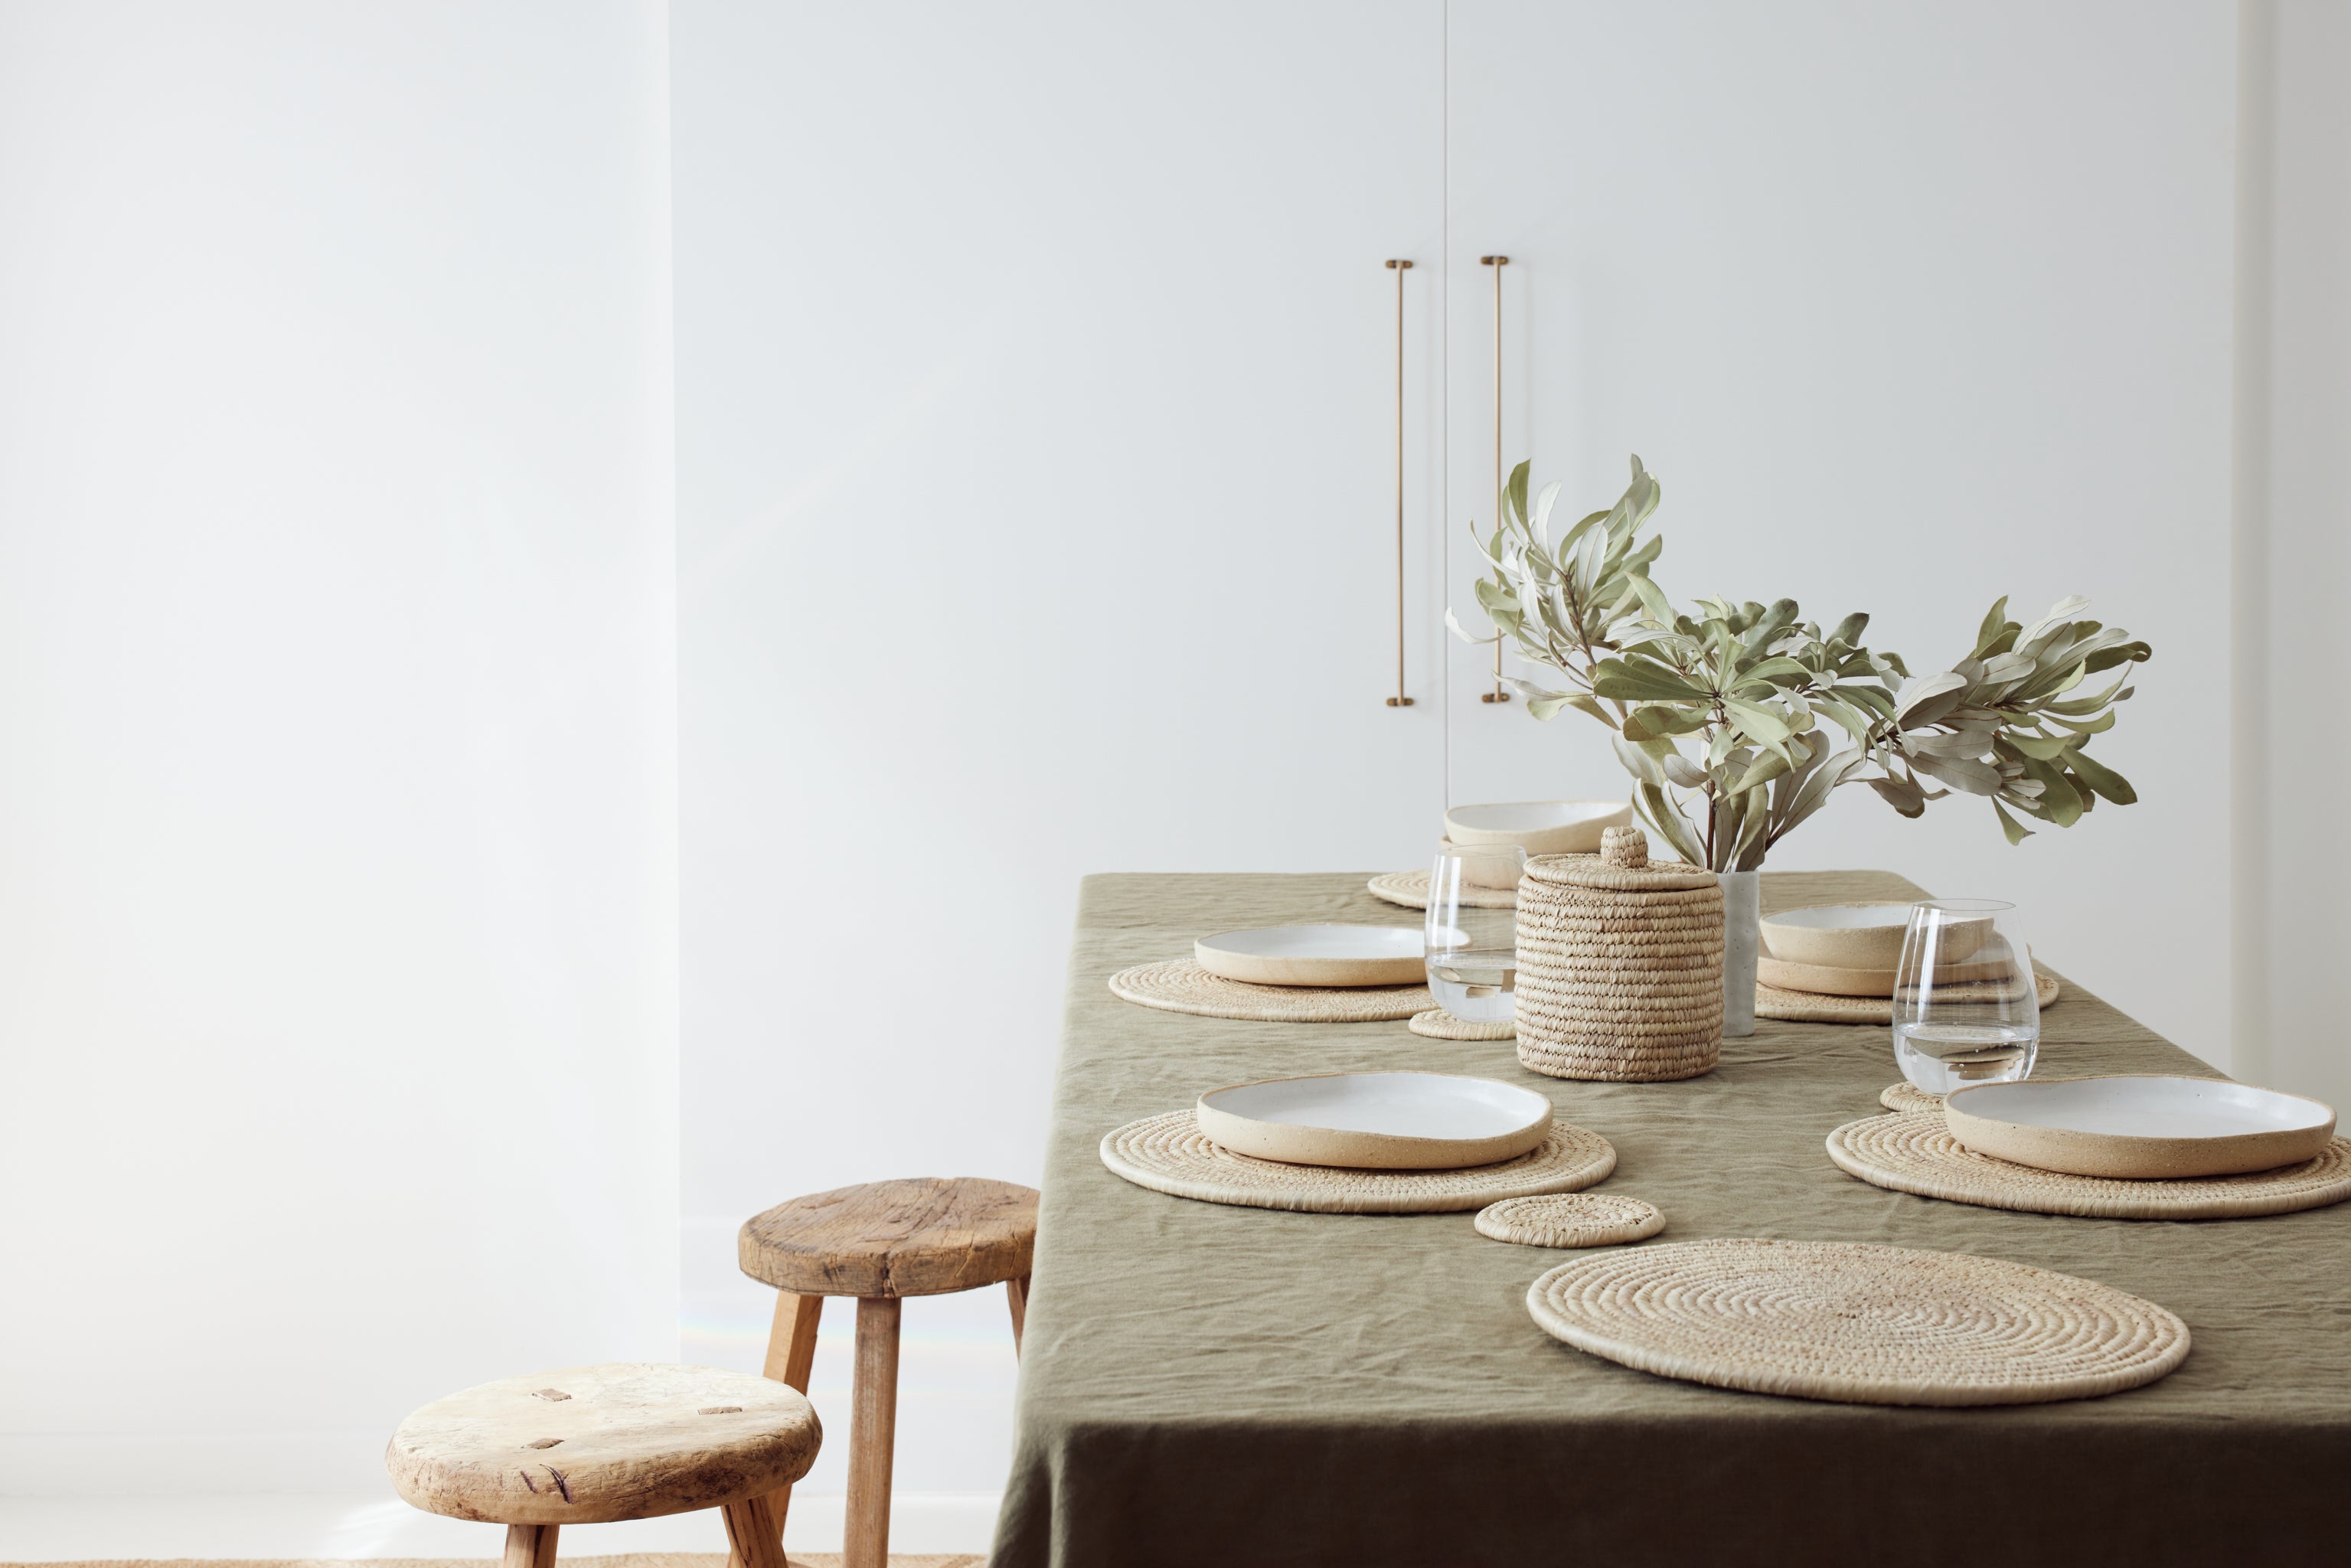 table setting with palm fibre placemats, olive green linen and foliage